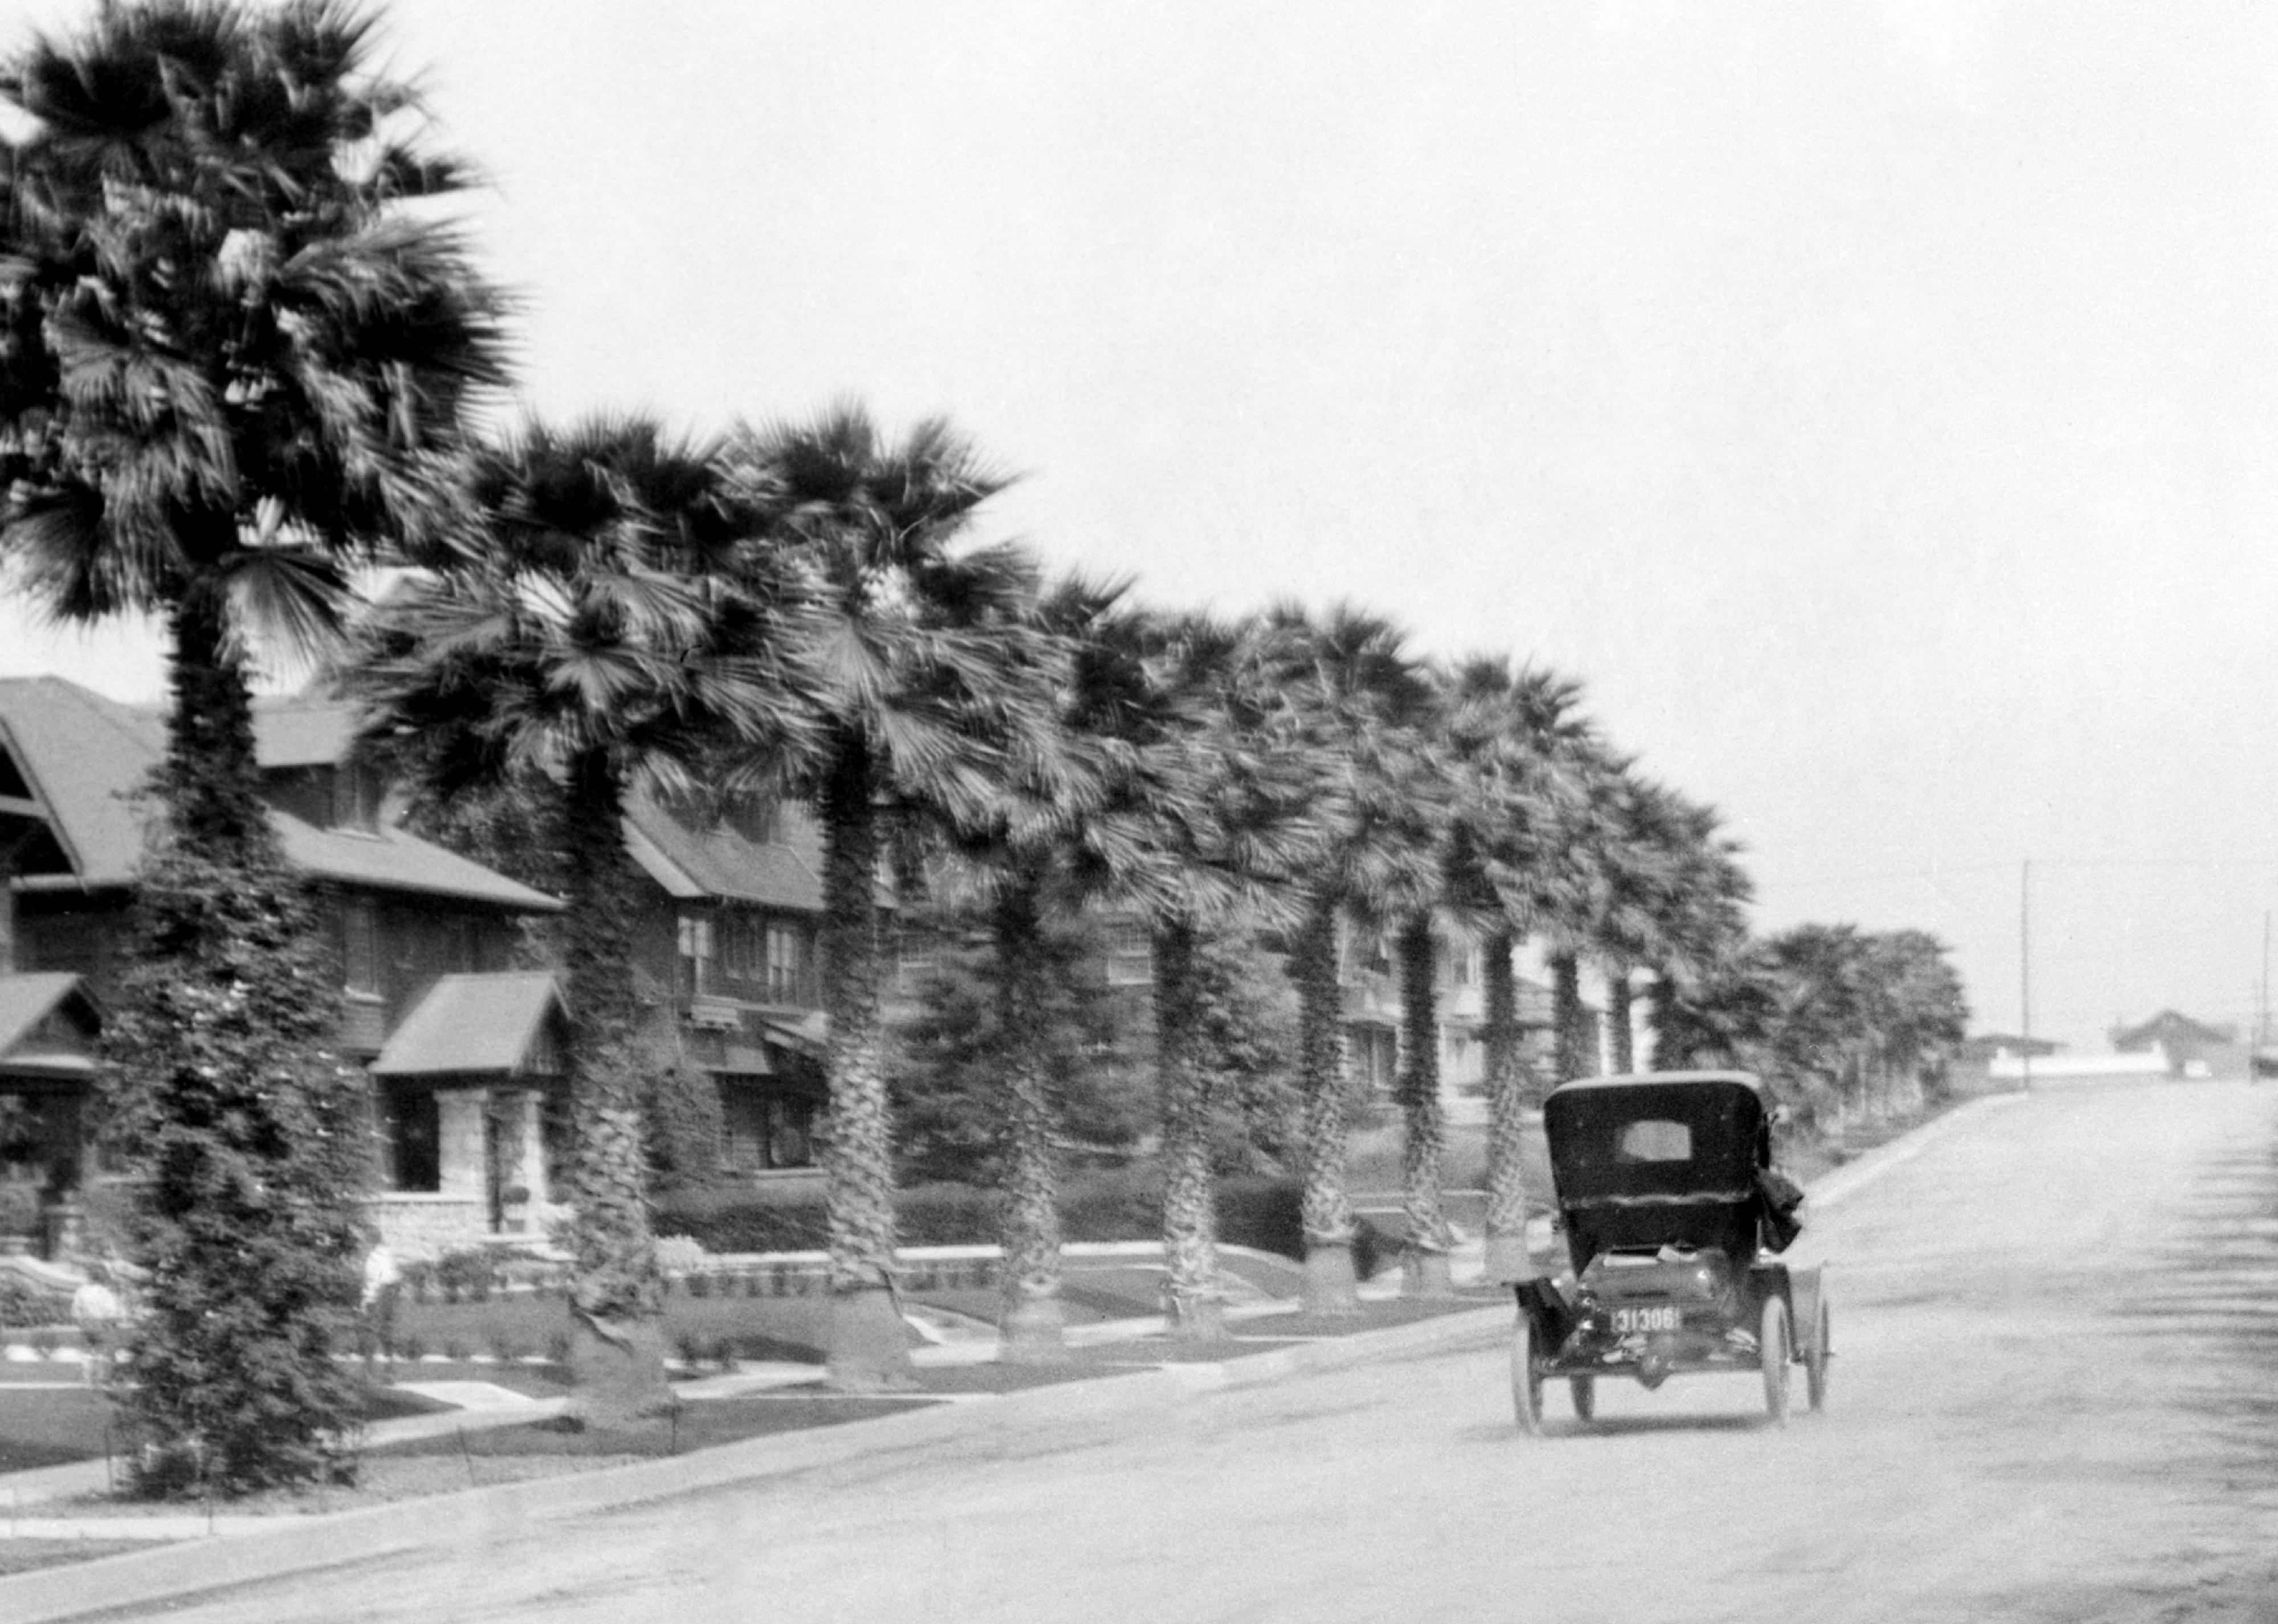 Early automobile on a street lined with palm trees and houses, circa 1910.